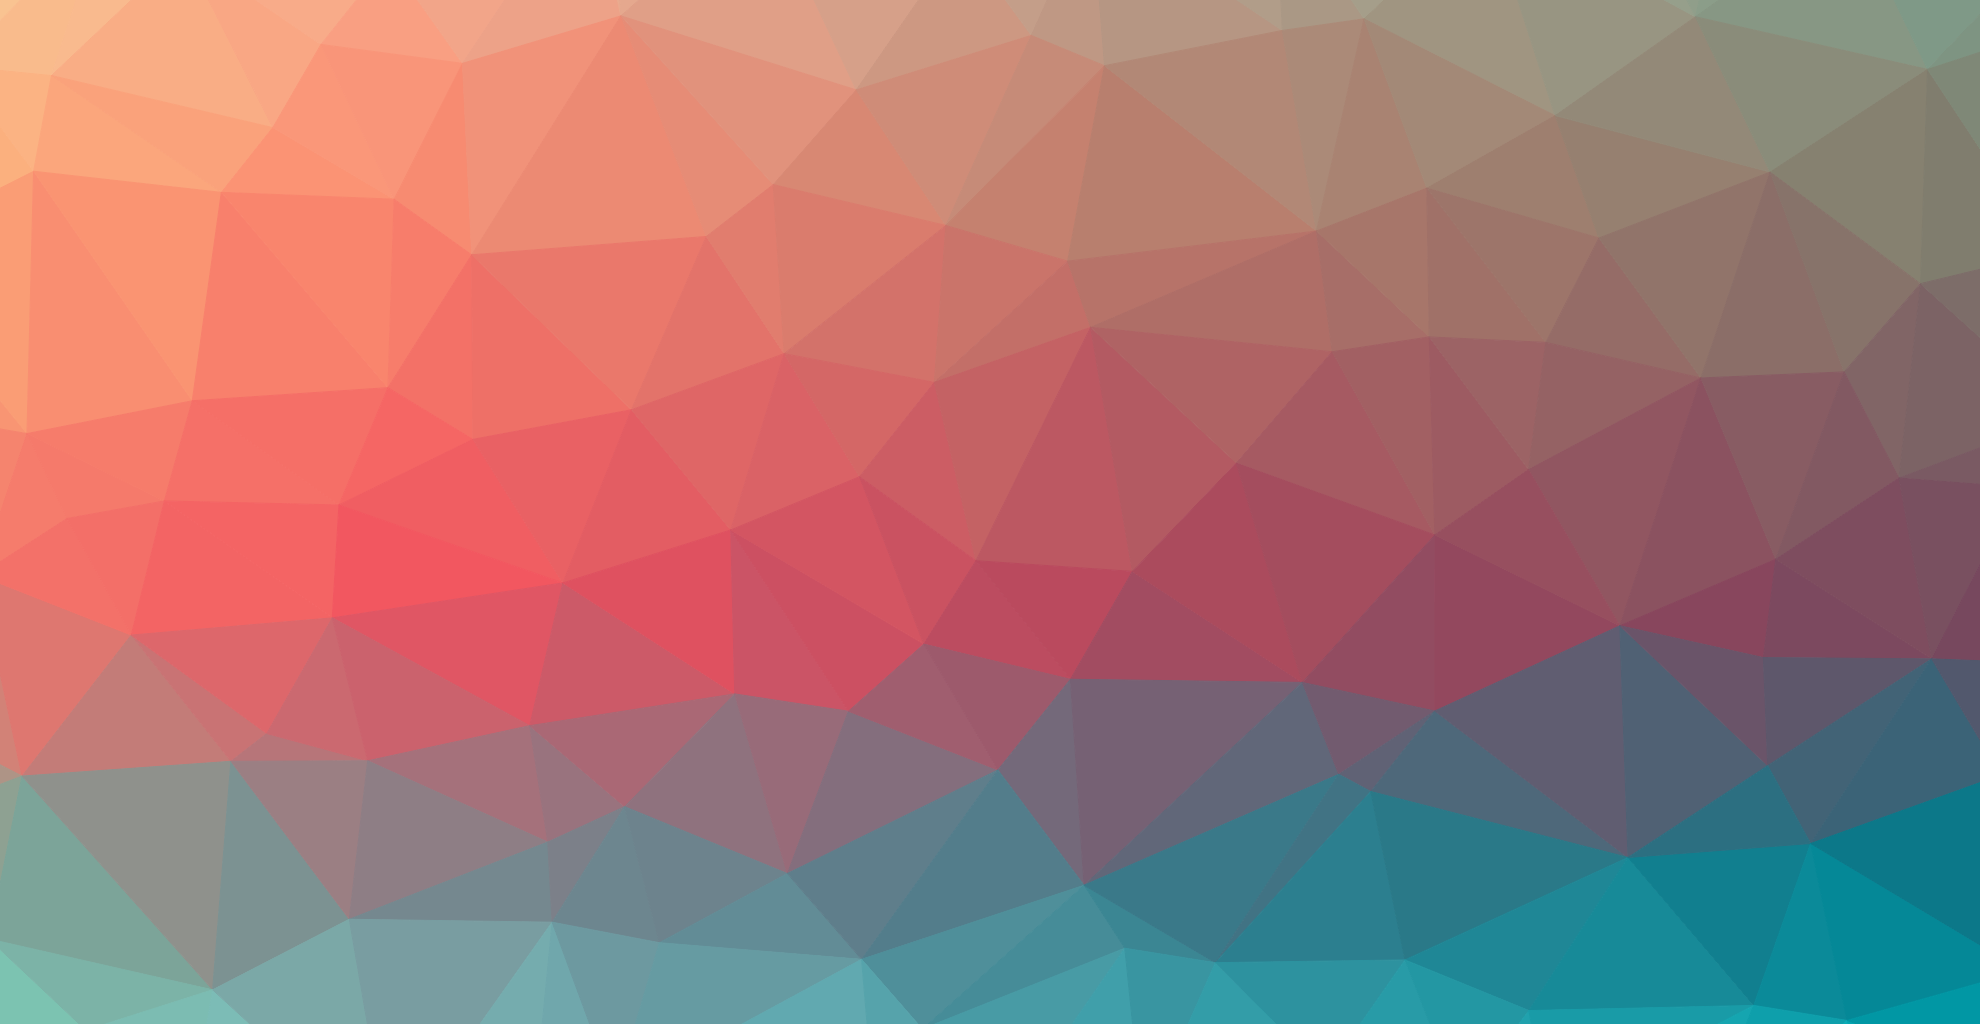 General 1980x1024 triangle abstract gradient soft gradient  Linux blue violet red orange minimalism turquoise